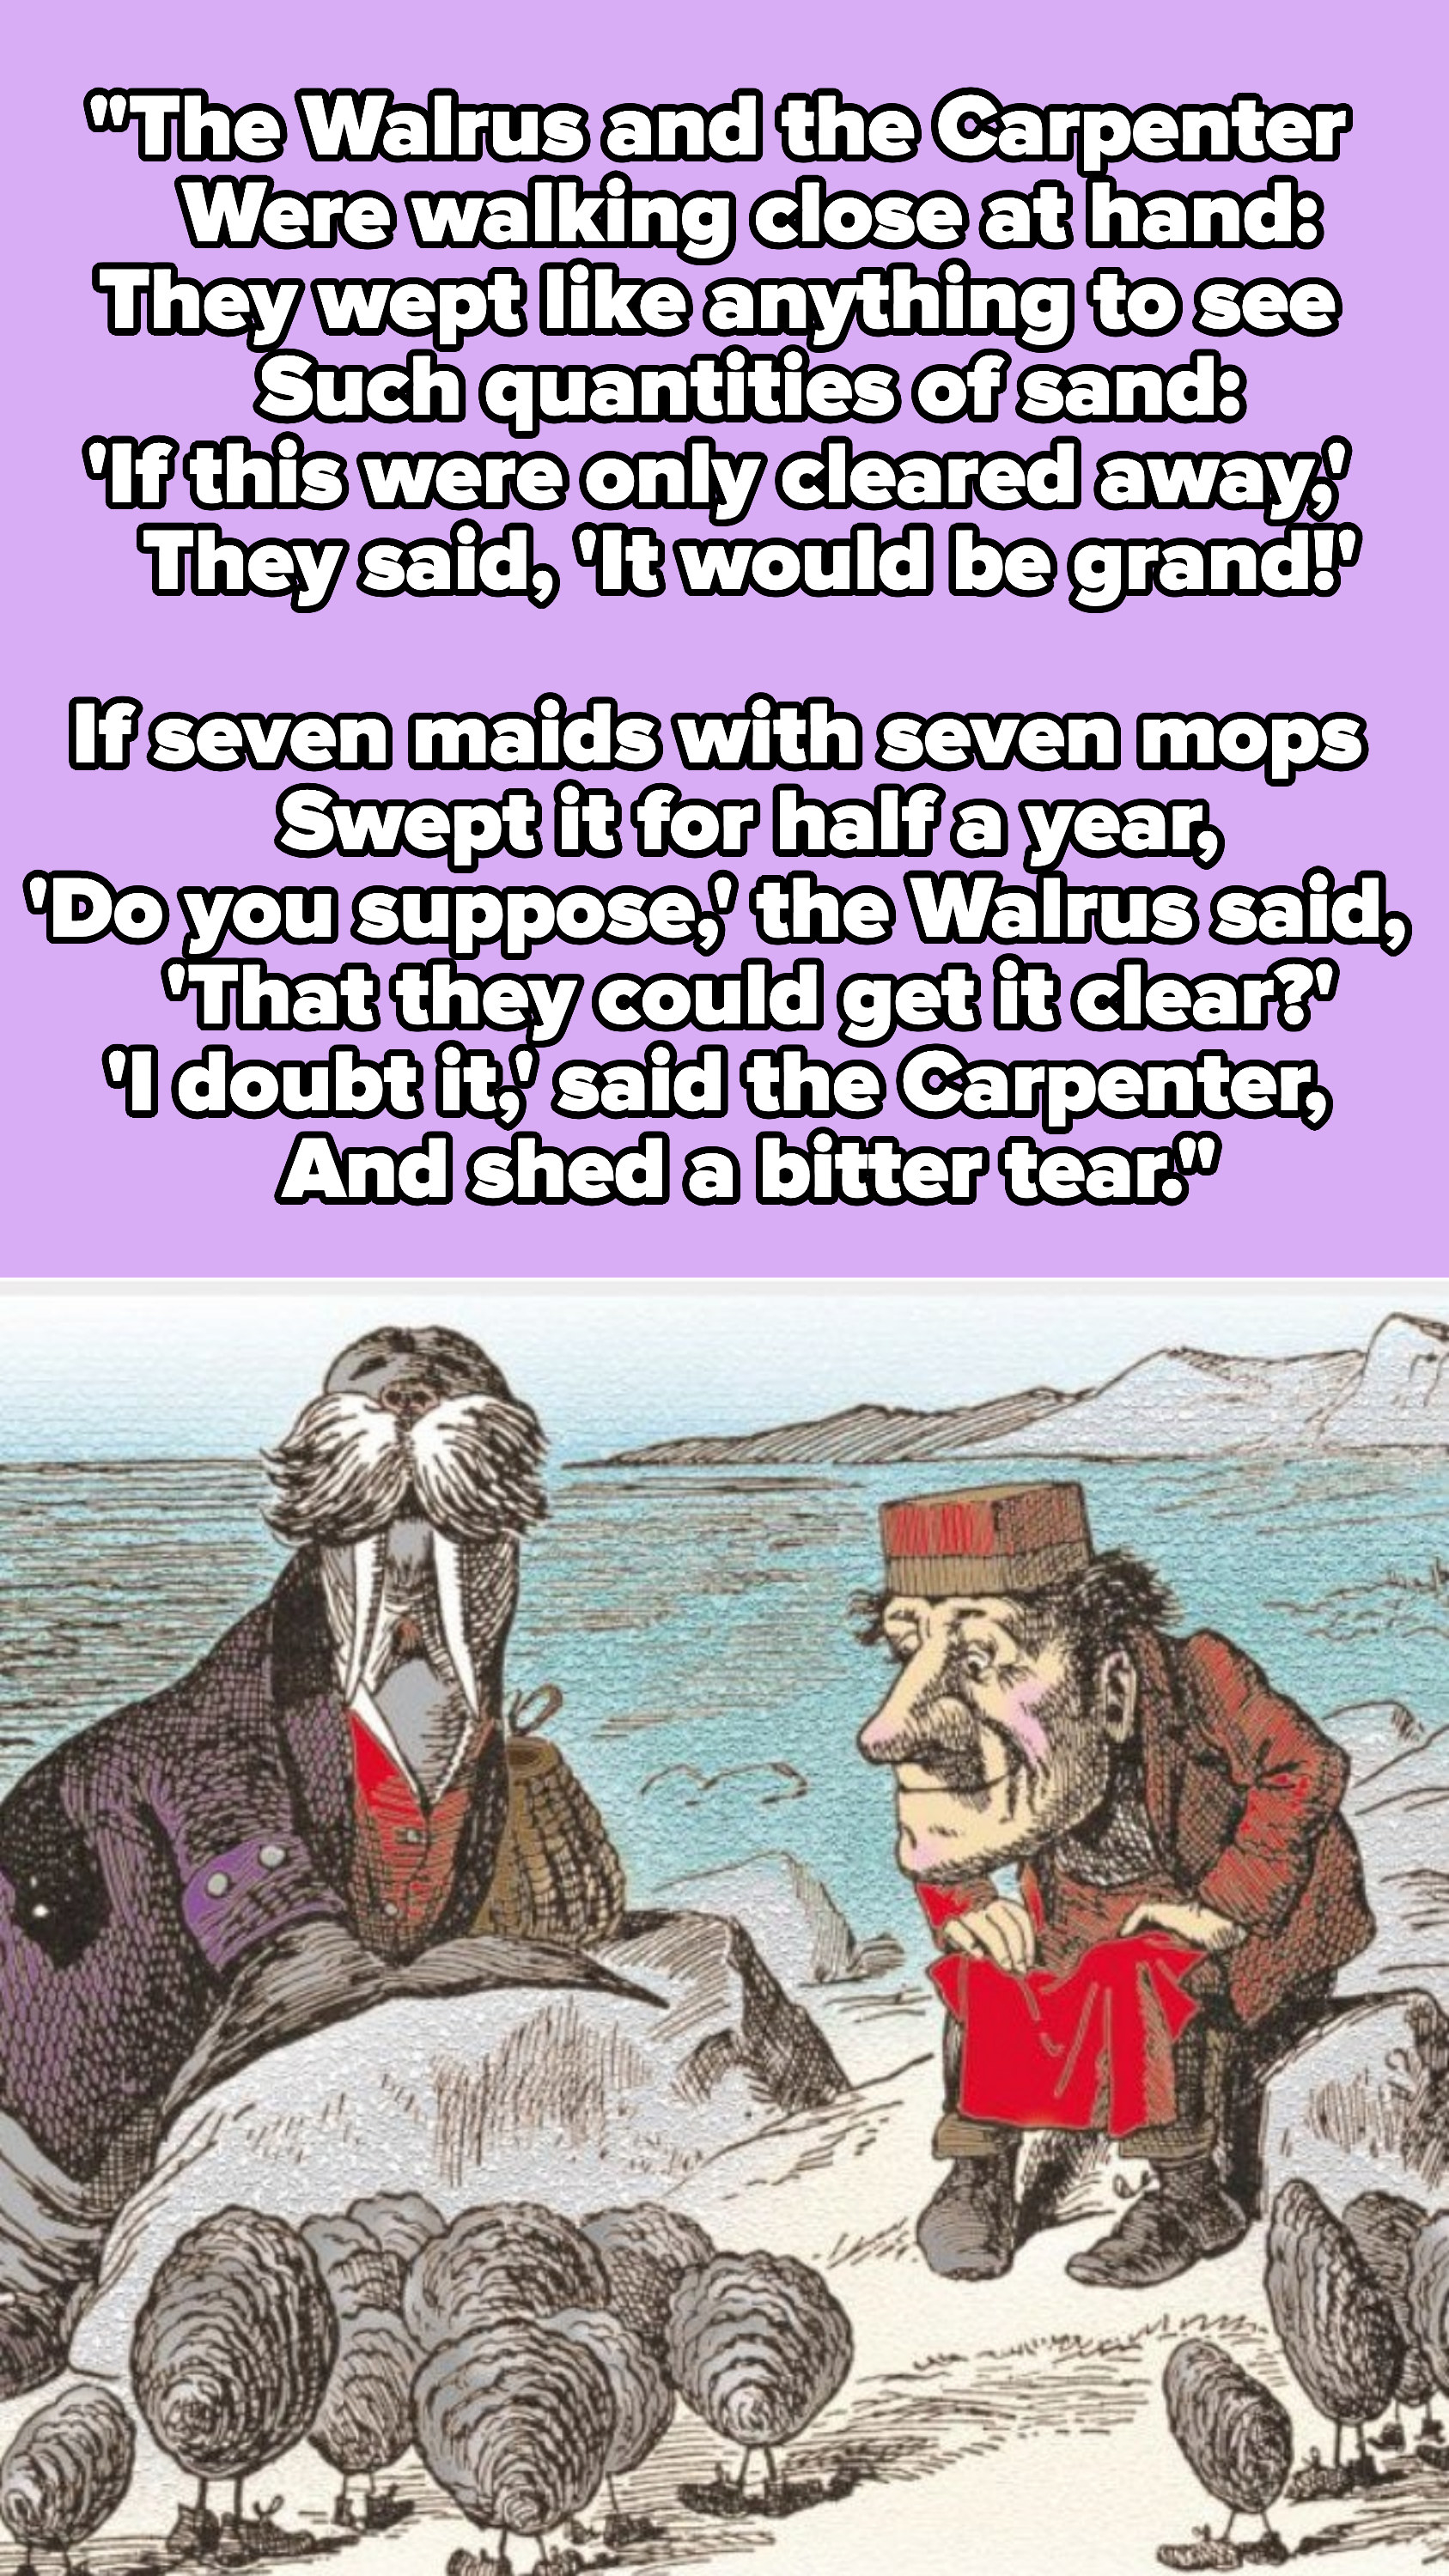 Lines from &quot;The Walrus and the Carpenter&quot; poem; Cartoon of the Walrus and the Carpenter from &quot;Through the Looking-Glass&quot;